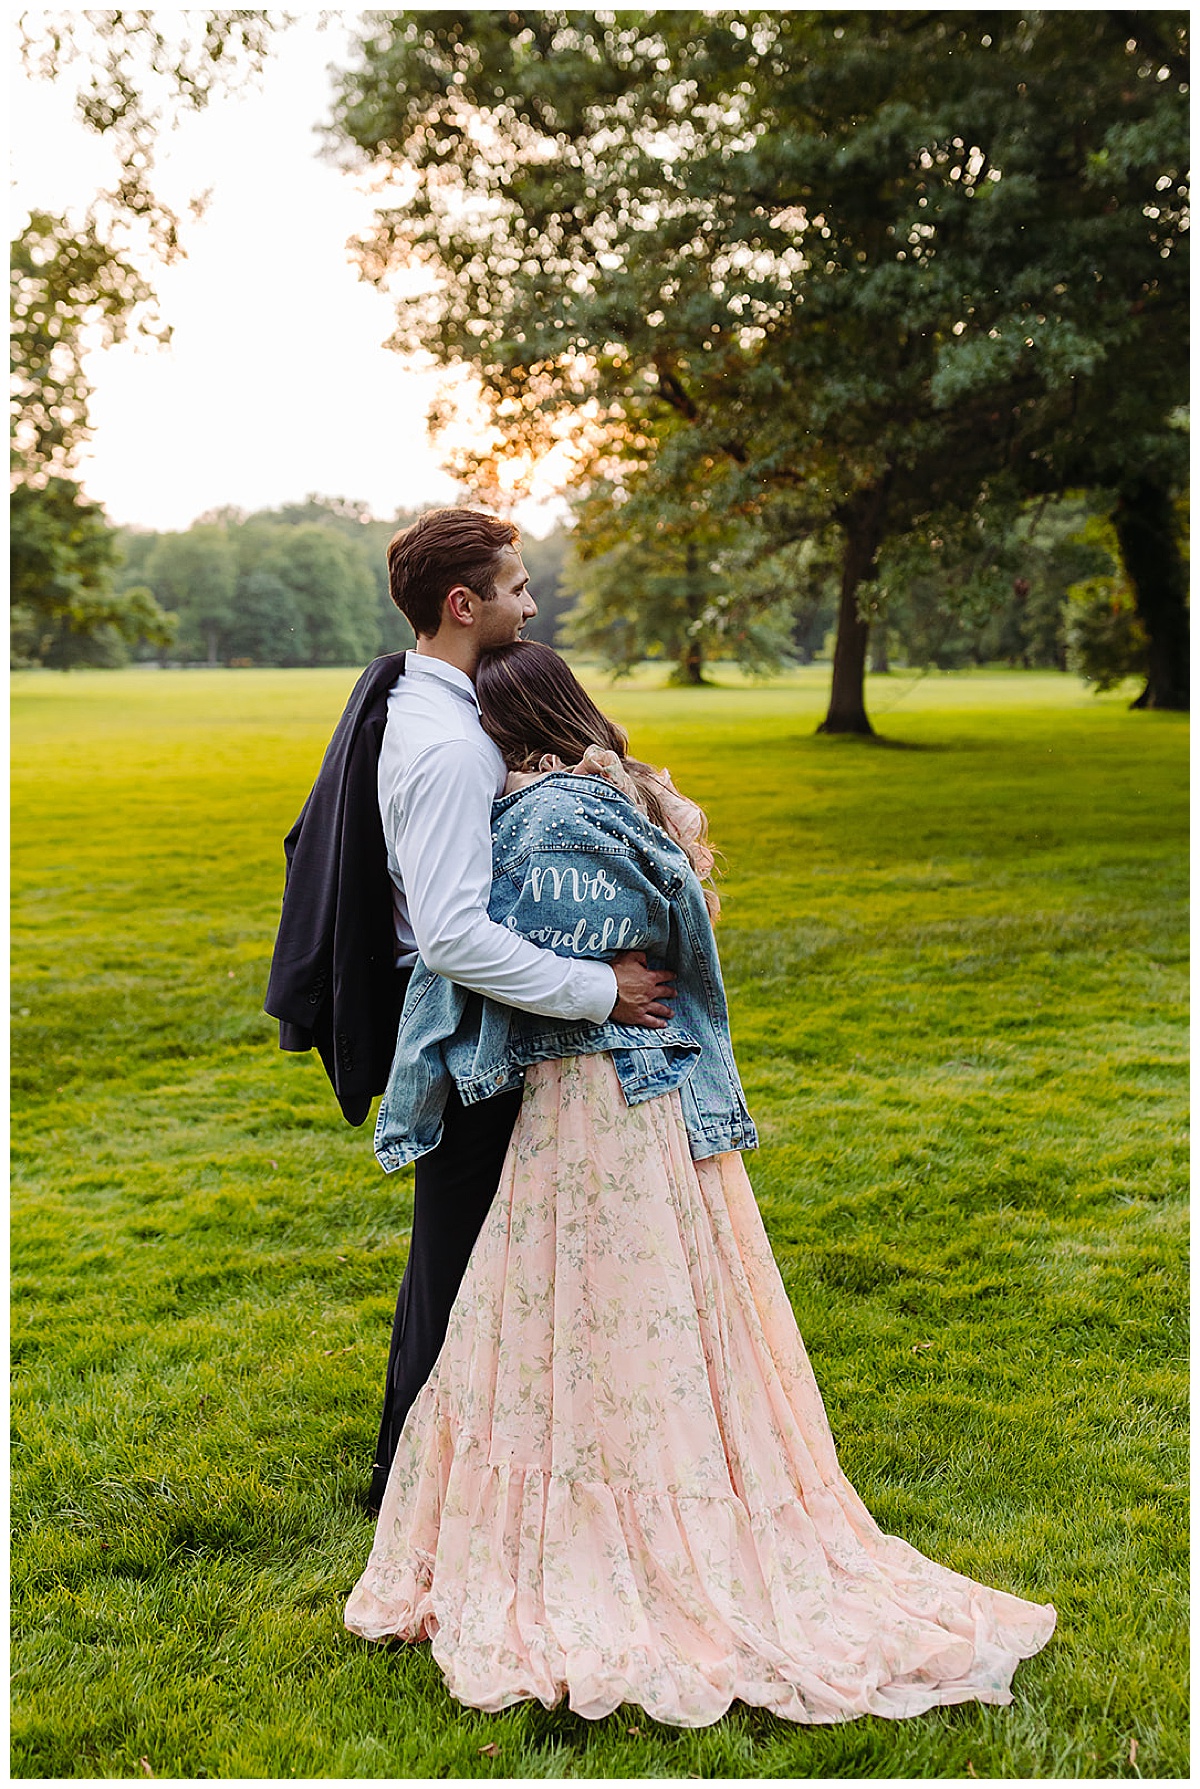 The couple hold each other close at one of the estate engagement session locations in Michigan